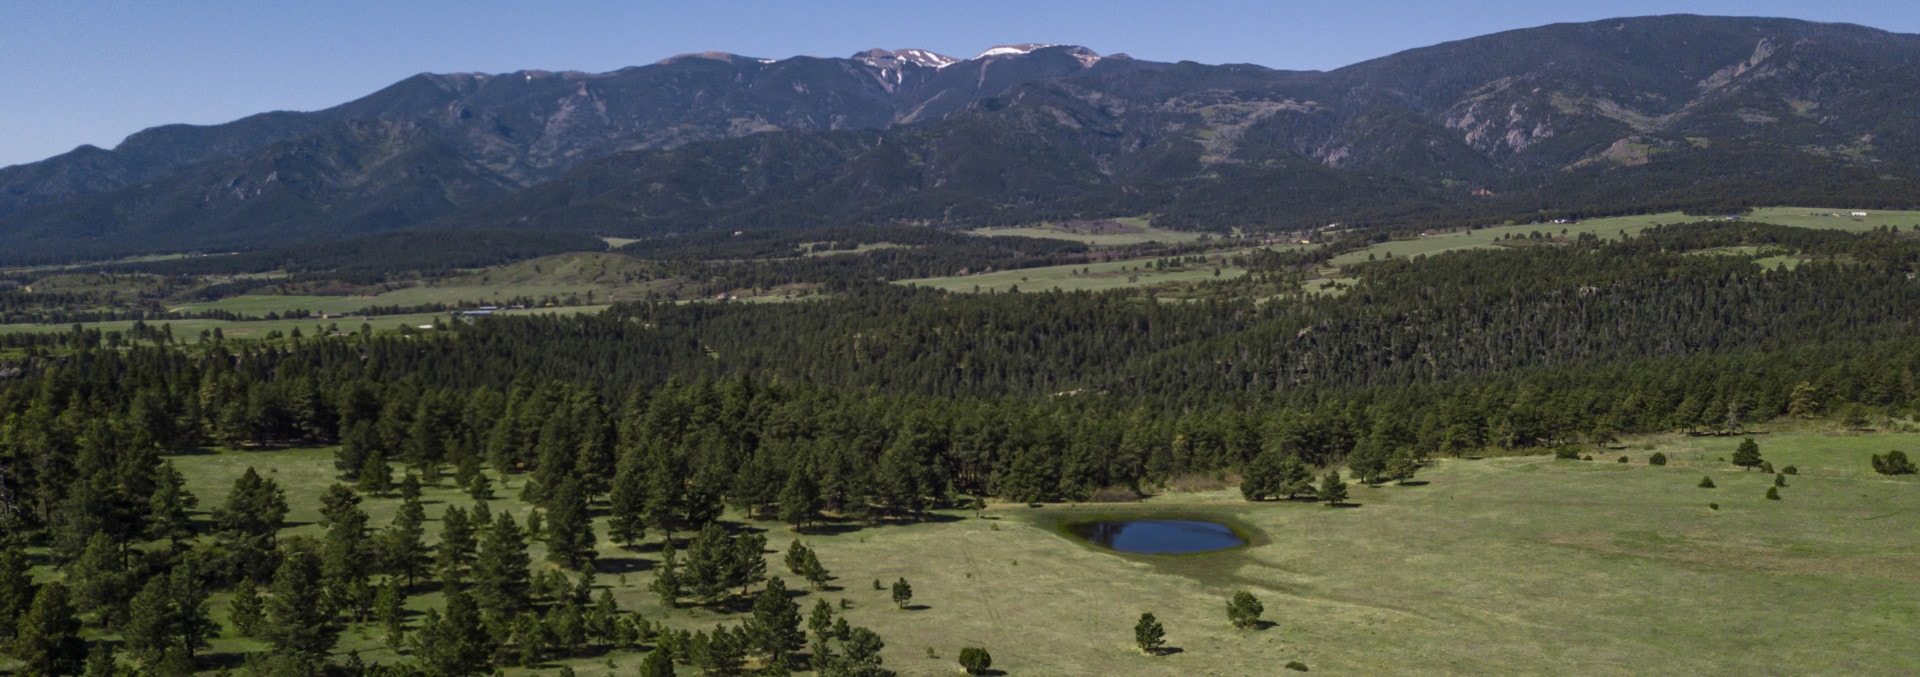 Colorado Fishing Land For Sale - Fishing Ranches For Sale